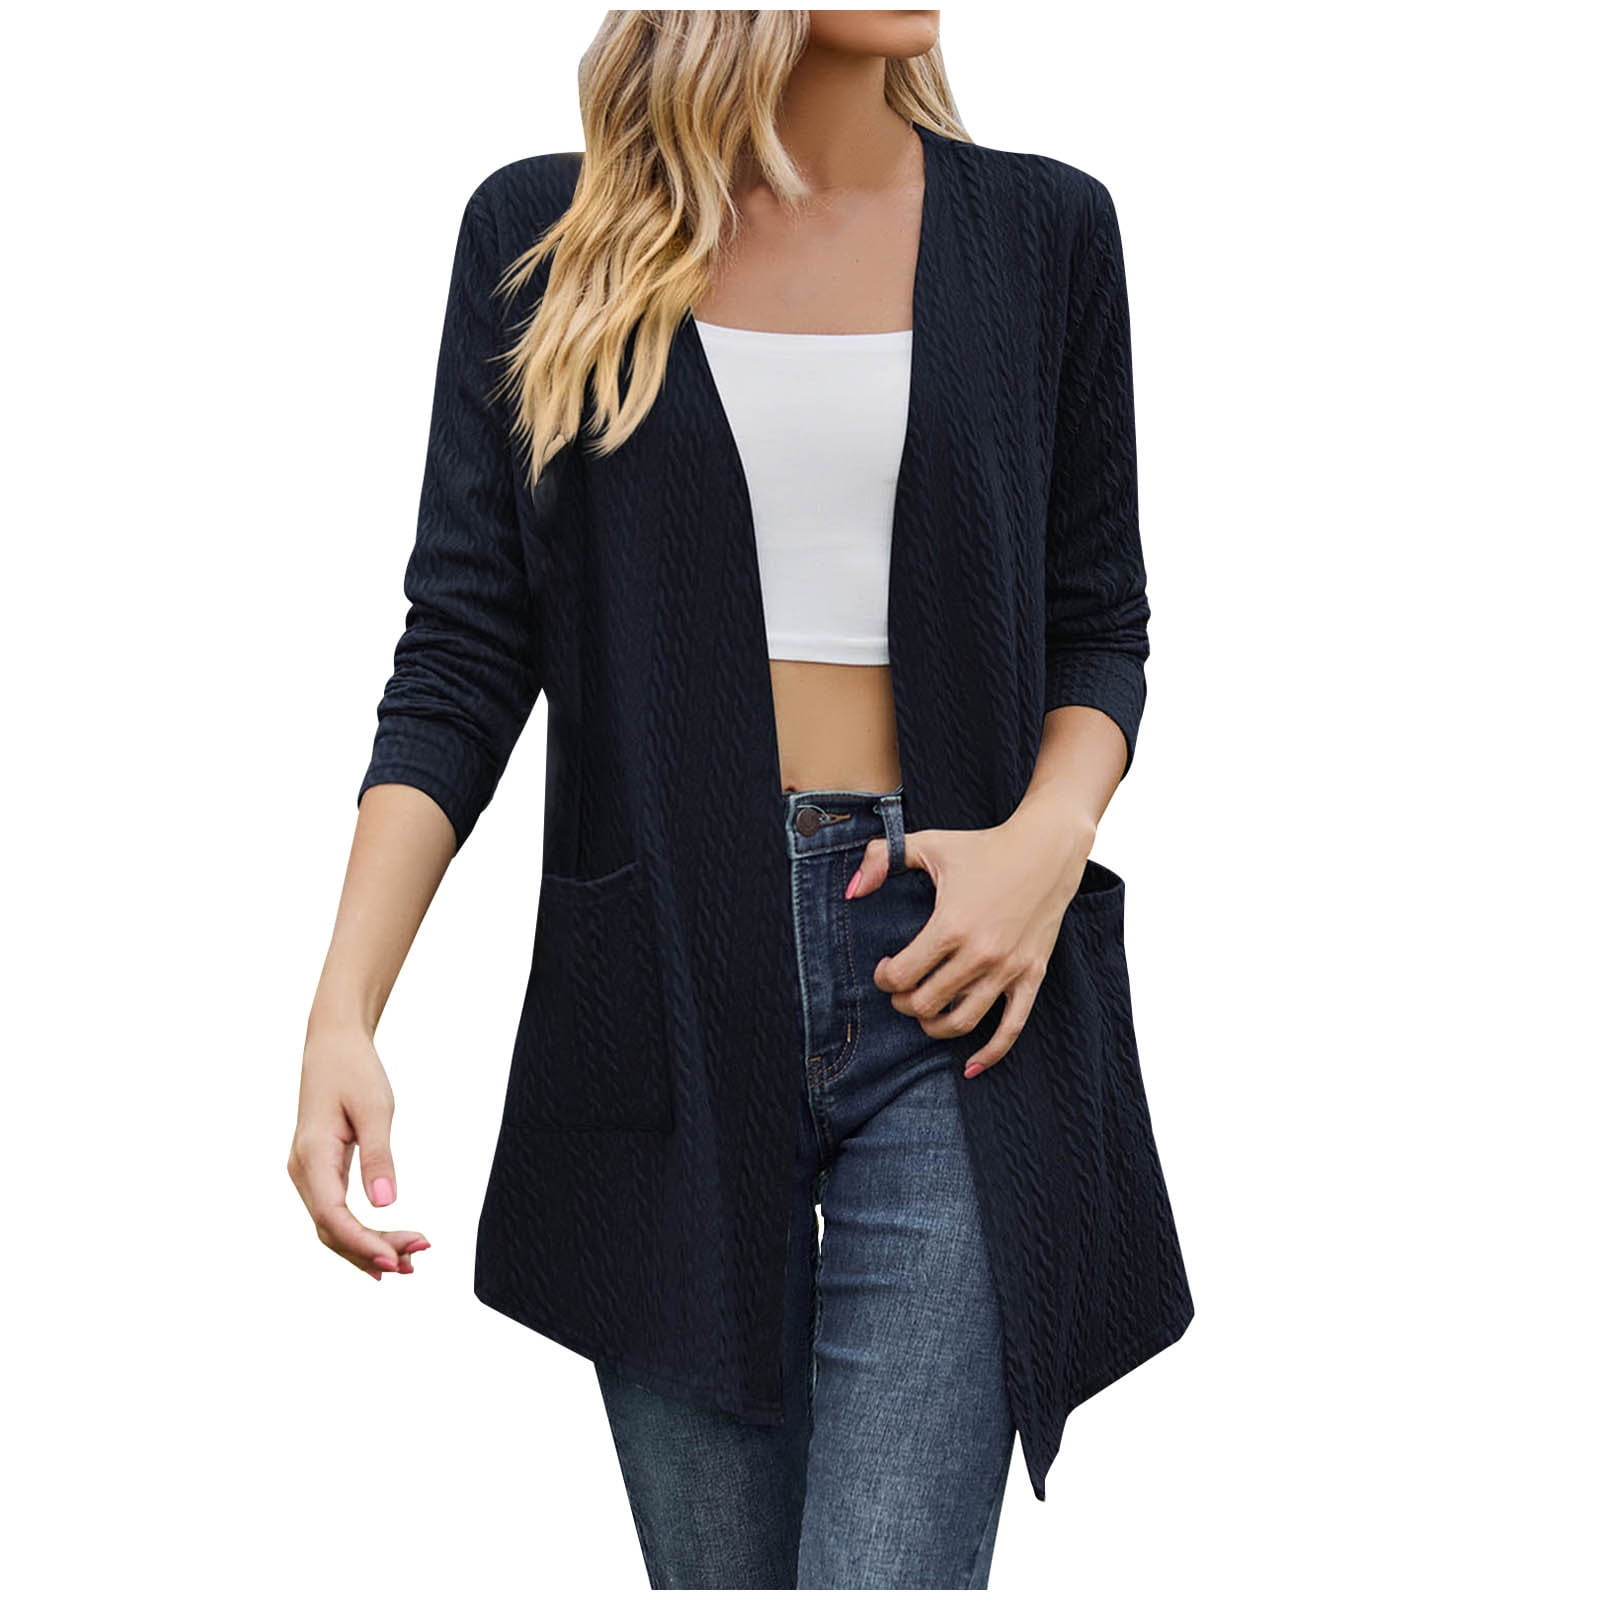 Henpk Time and Tru Womens Plus Size Clearance Under 10 Women's Cardigan ...